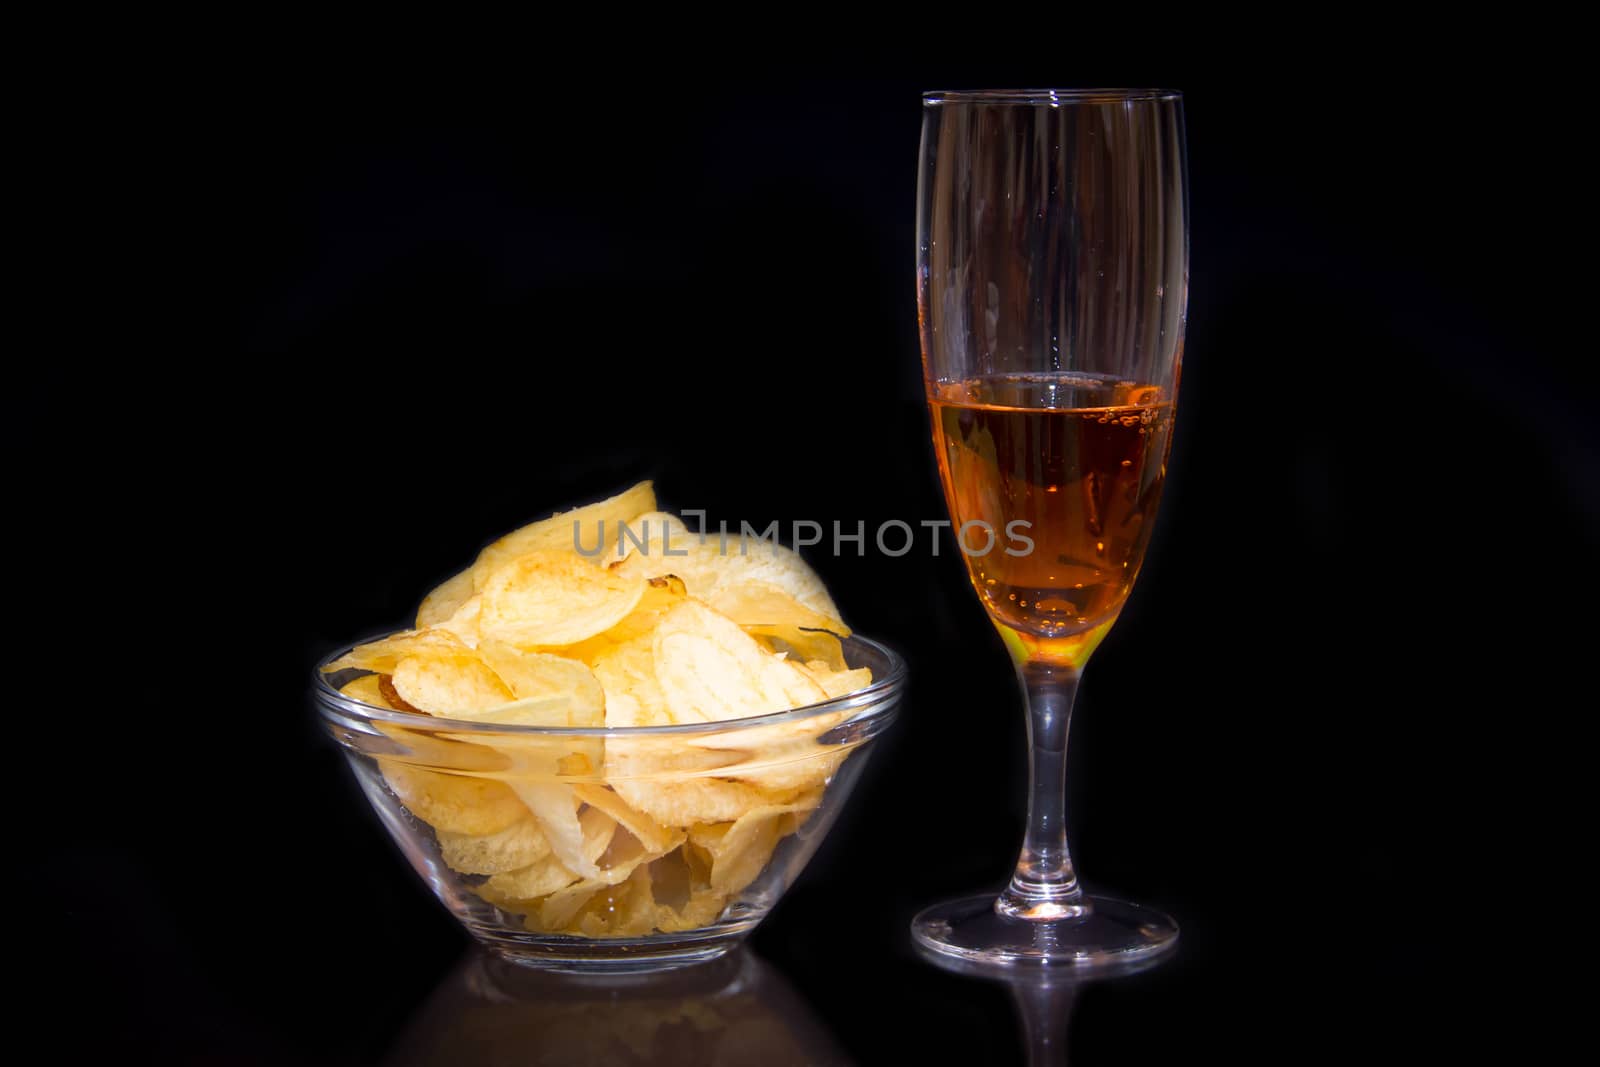 Aperitif seen in front of a black background